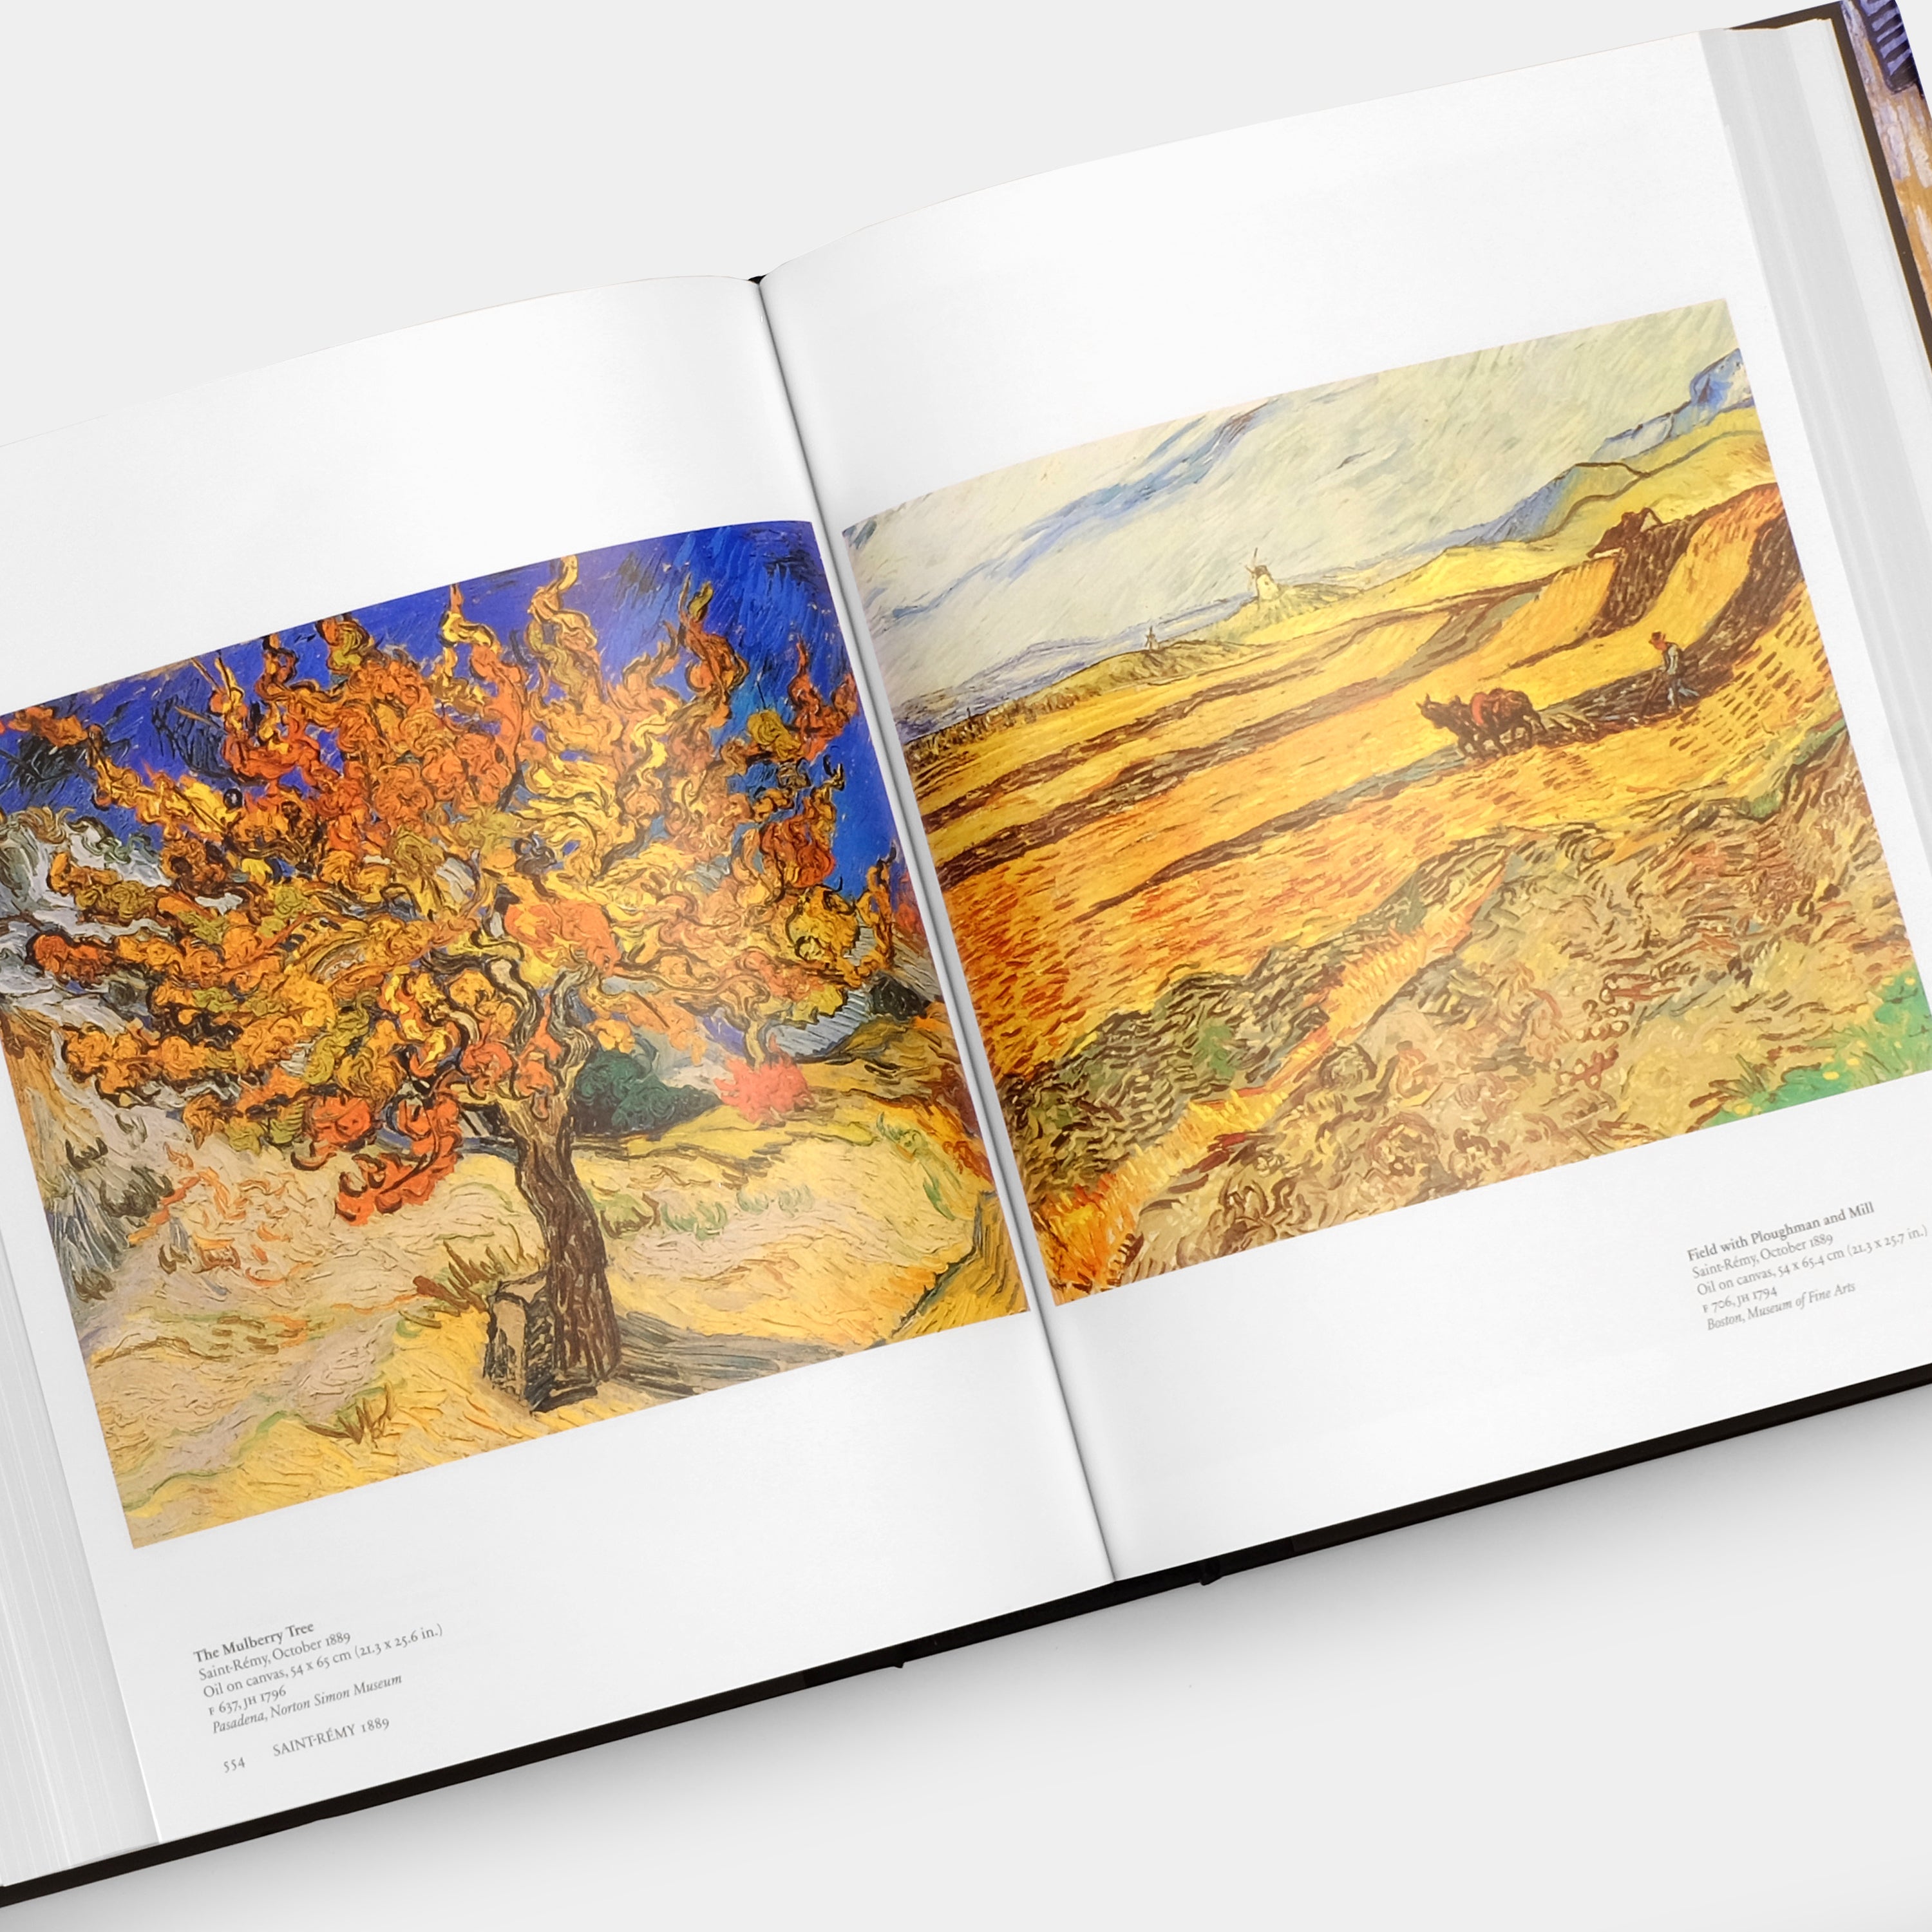 Vincent Van Gogh: The Complete Paintings